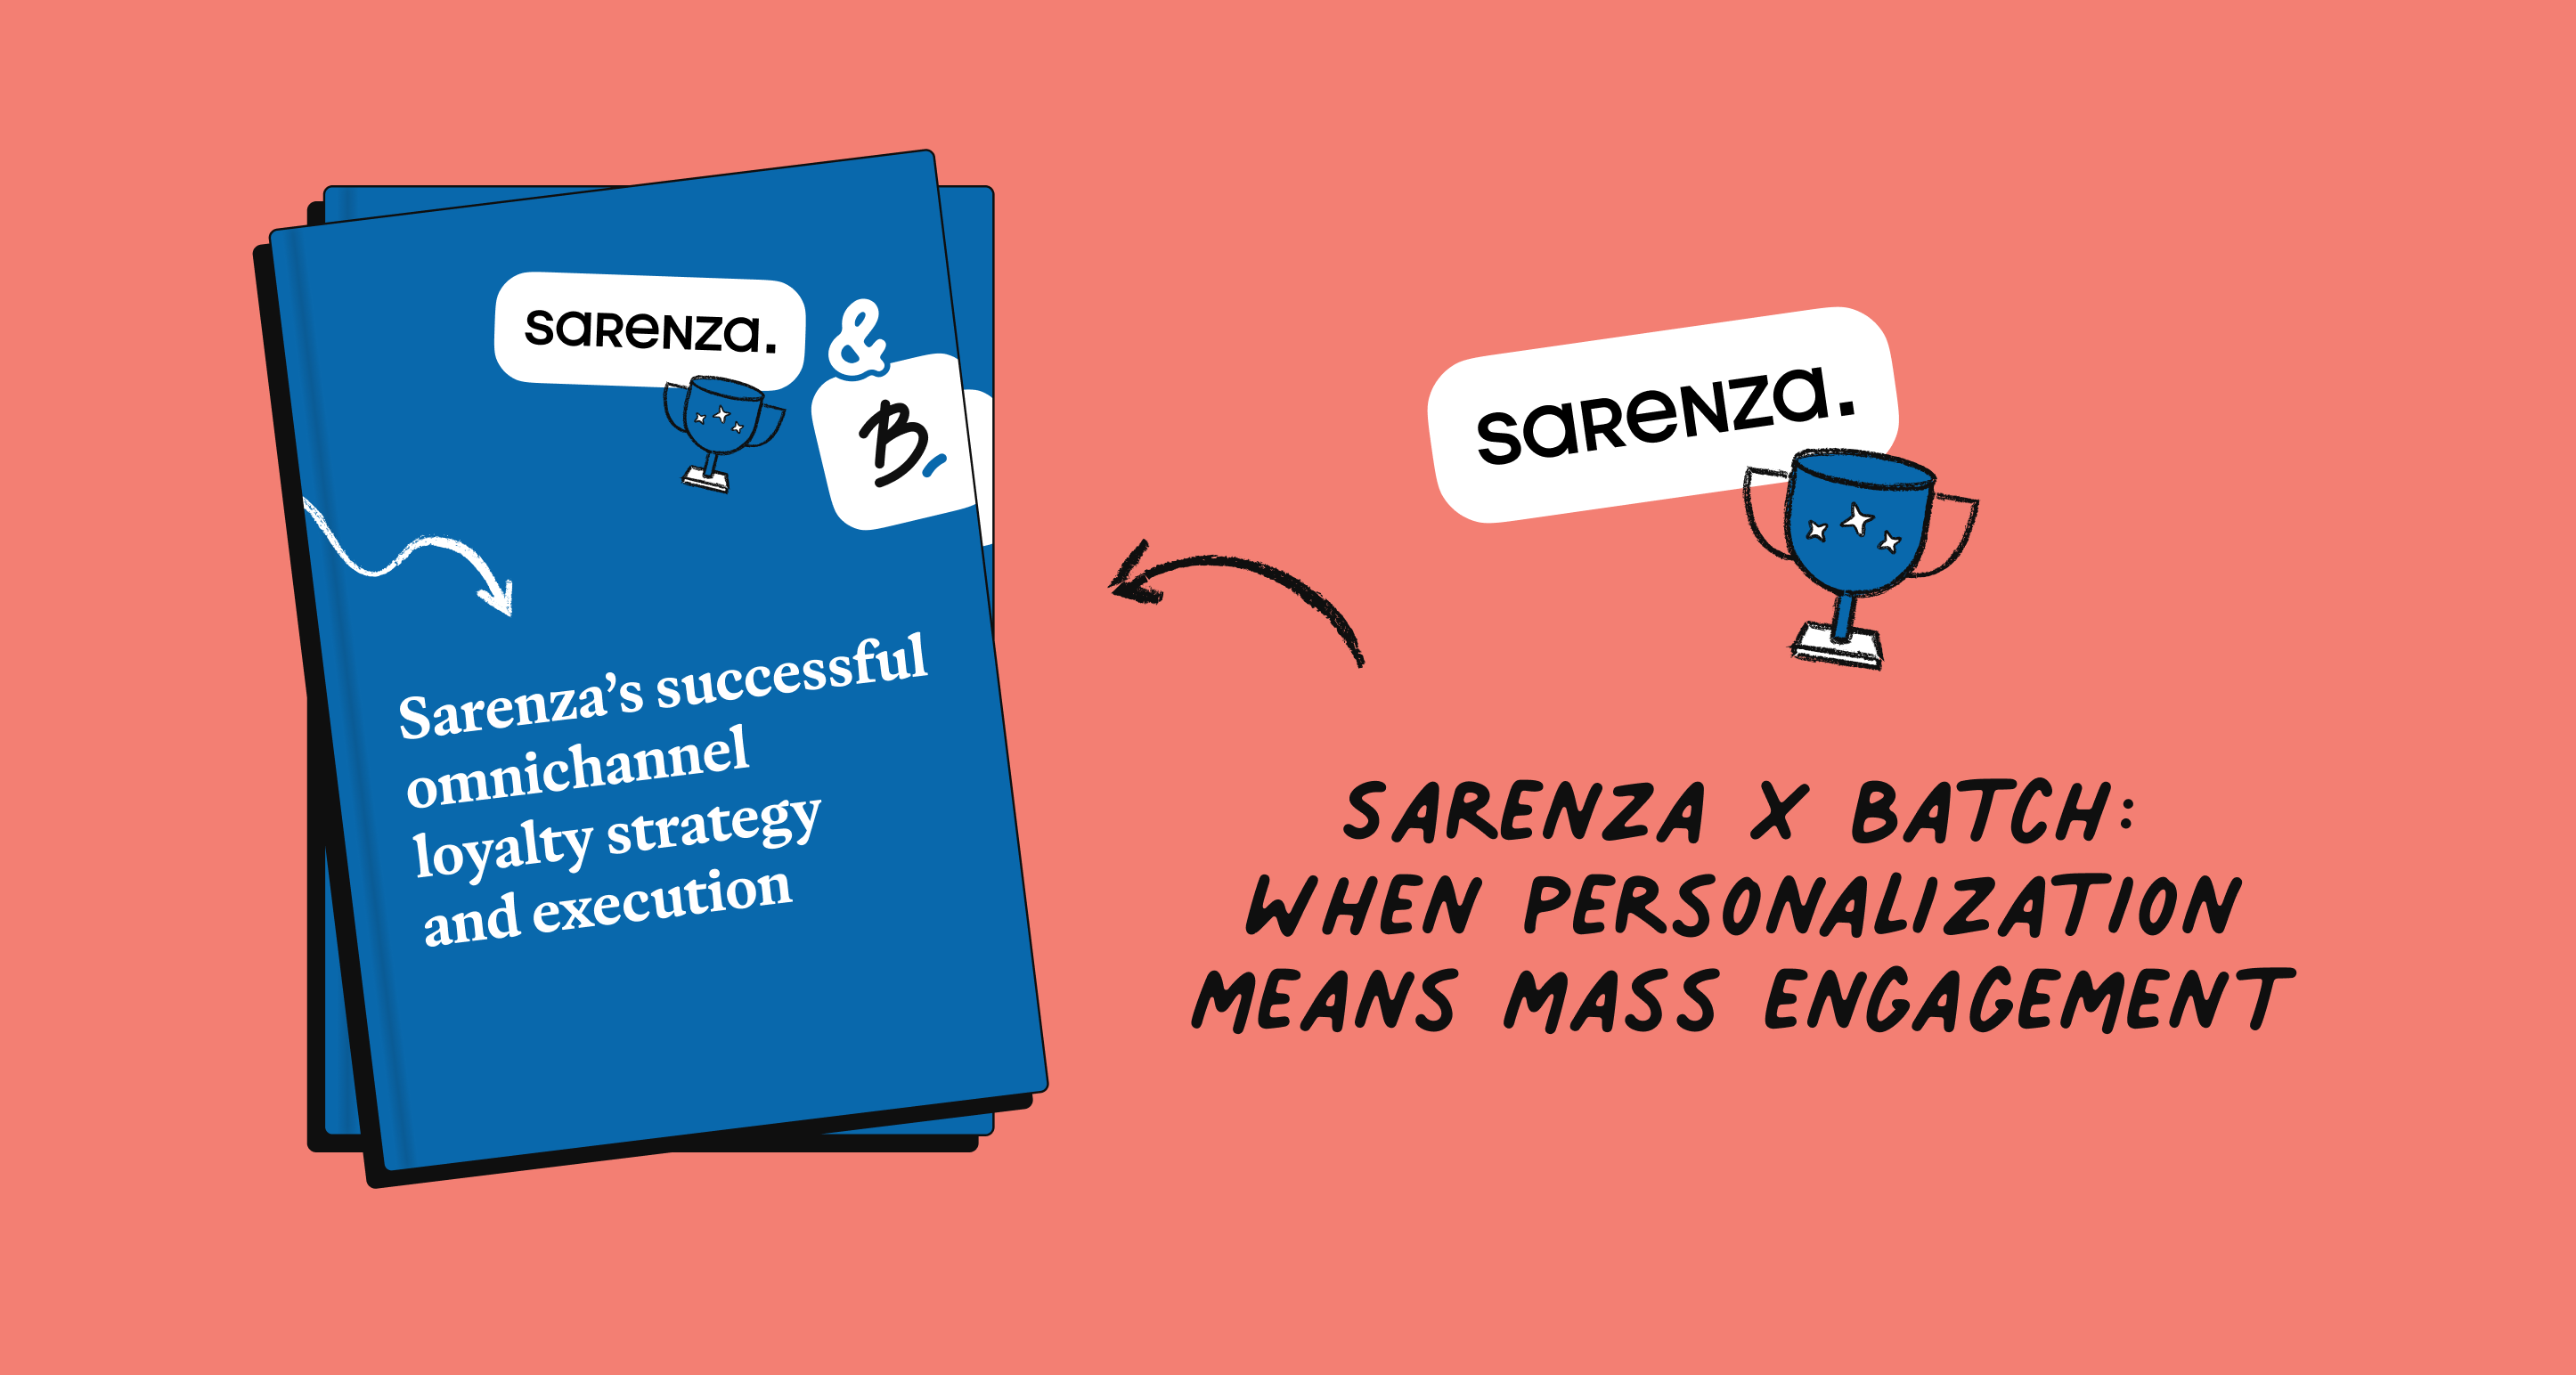 How did Sarenza successfully deploy its omnichannel loyalty strategy with Batch?